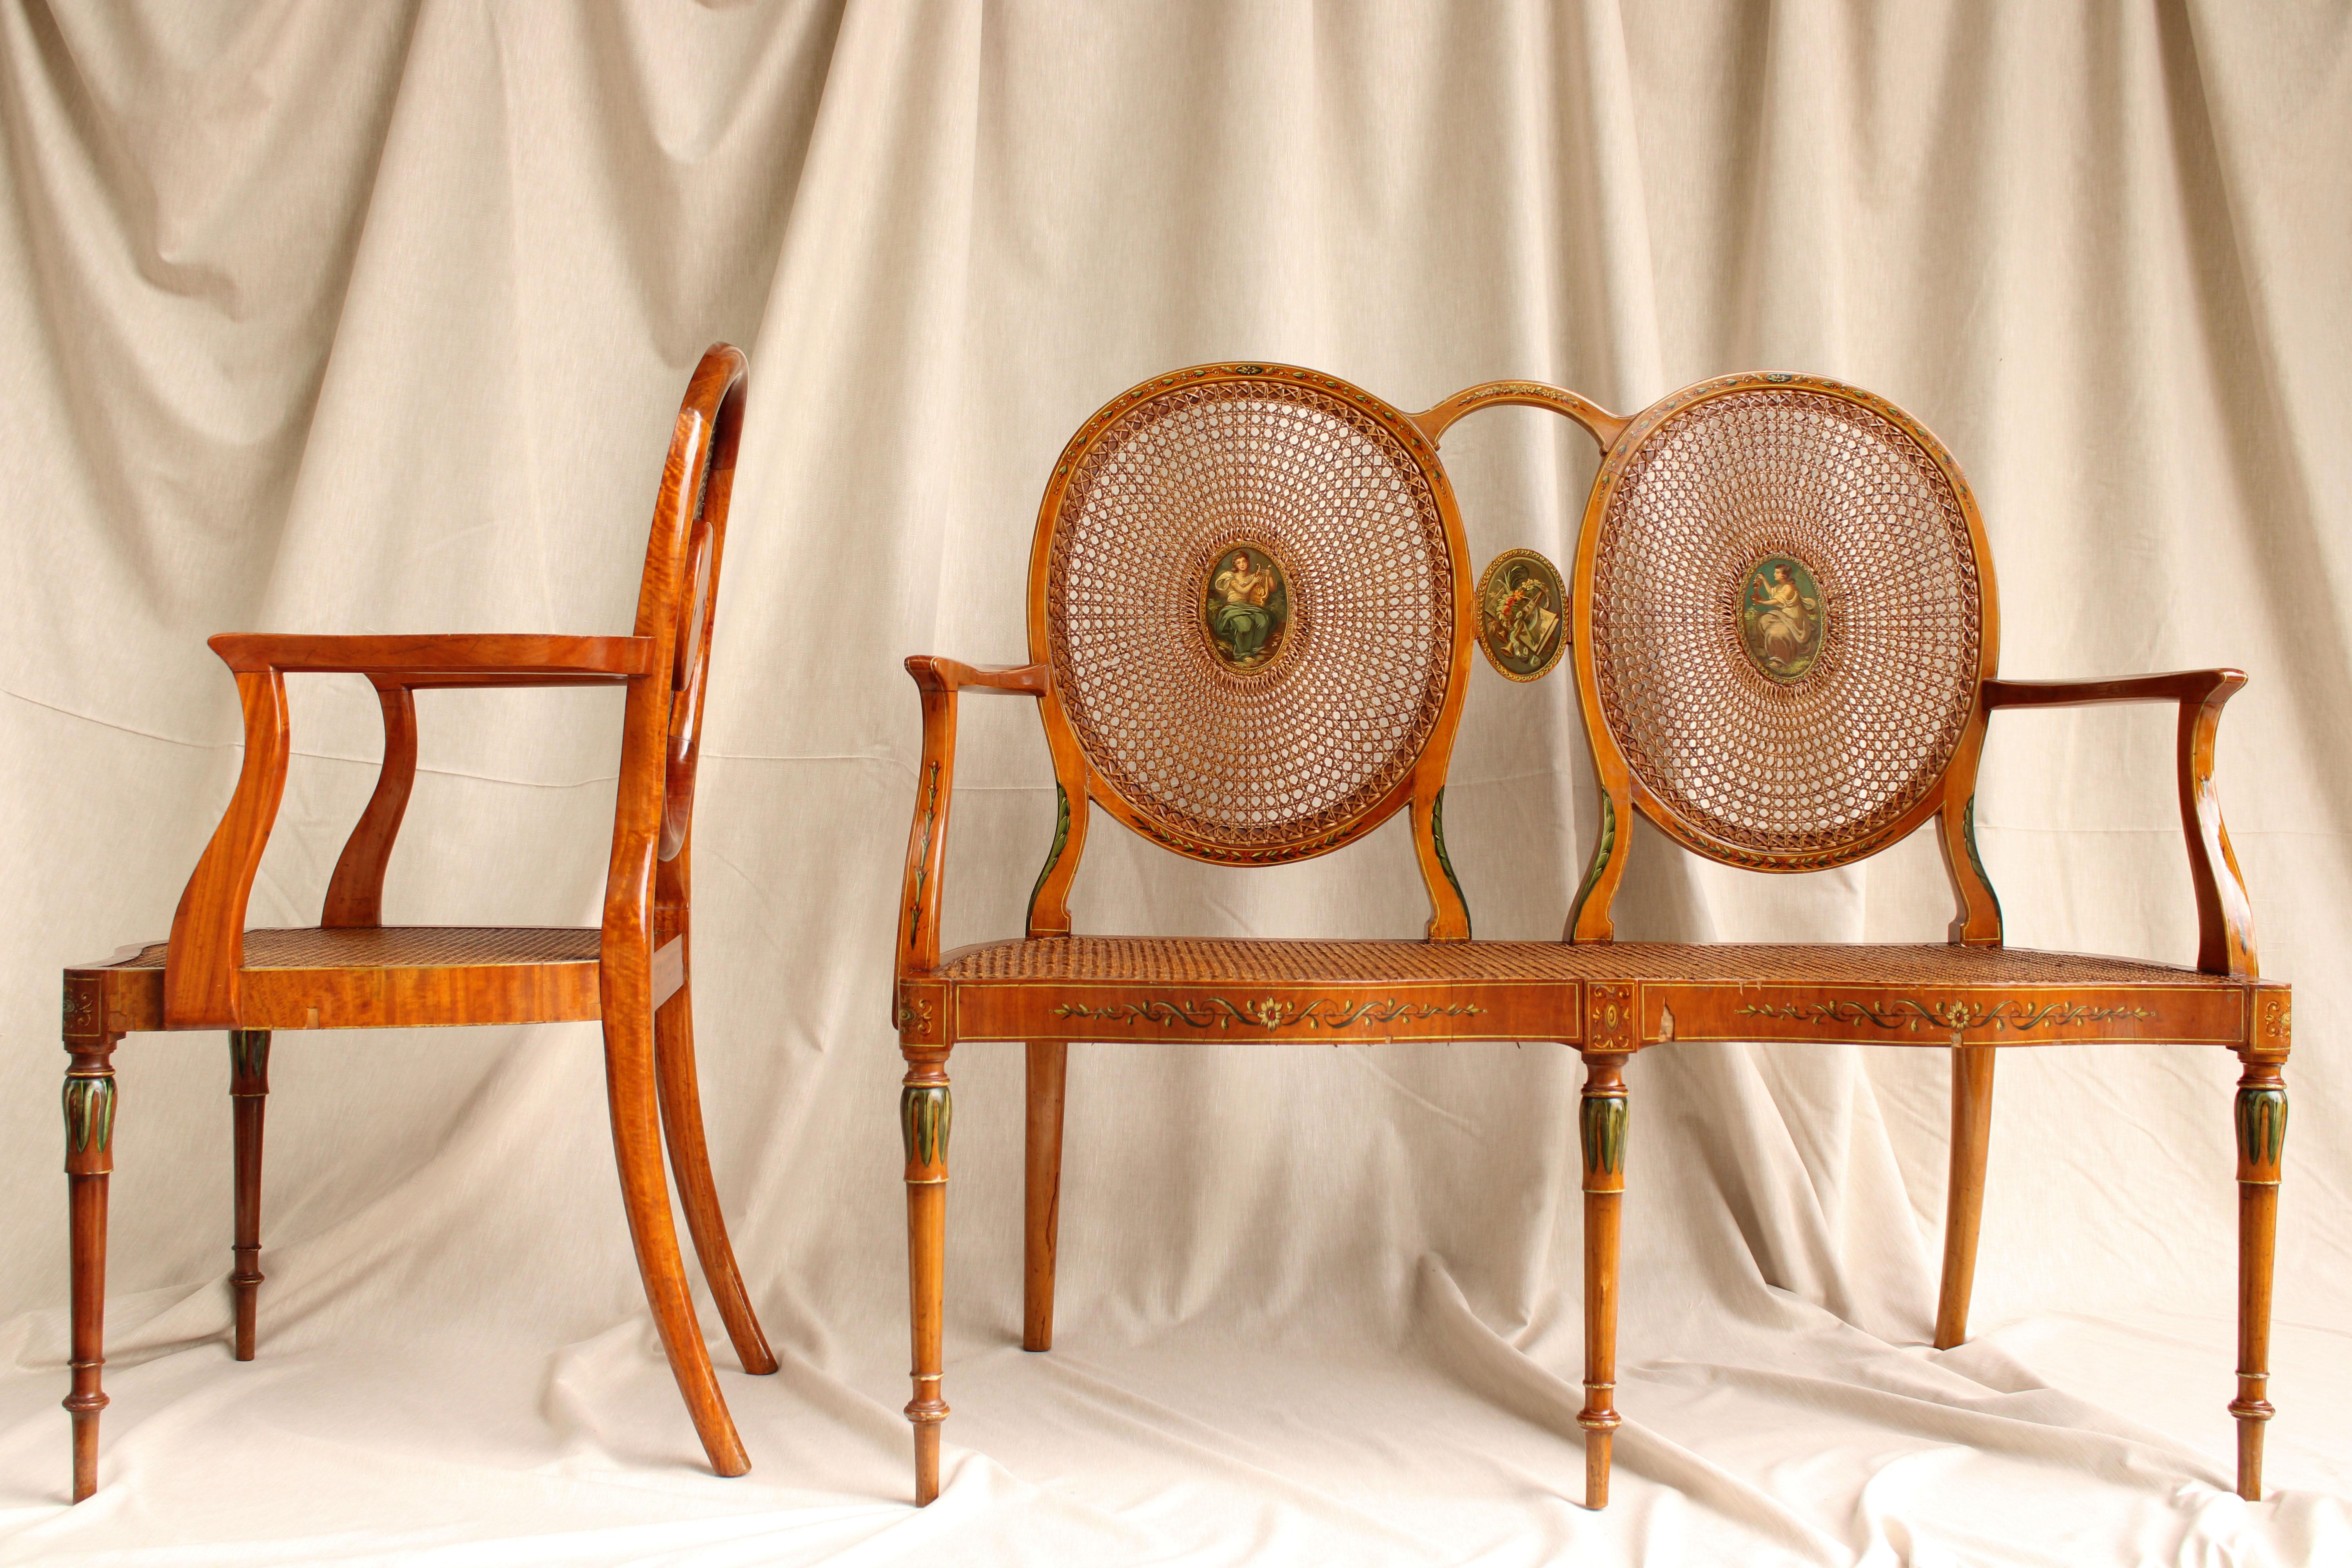 This 19th century French furniture set is truly remarkable and has a unique and elegant style. The set includes two chairs and a settee, all made of natural cane and with medallions painted to the taste of Angelica Kauffmann, an 18th-century Swiss